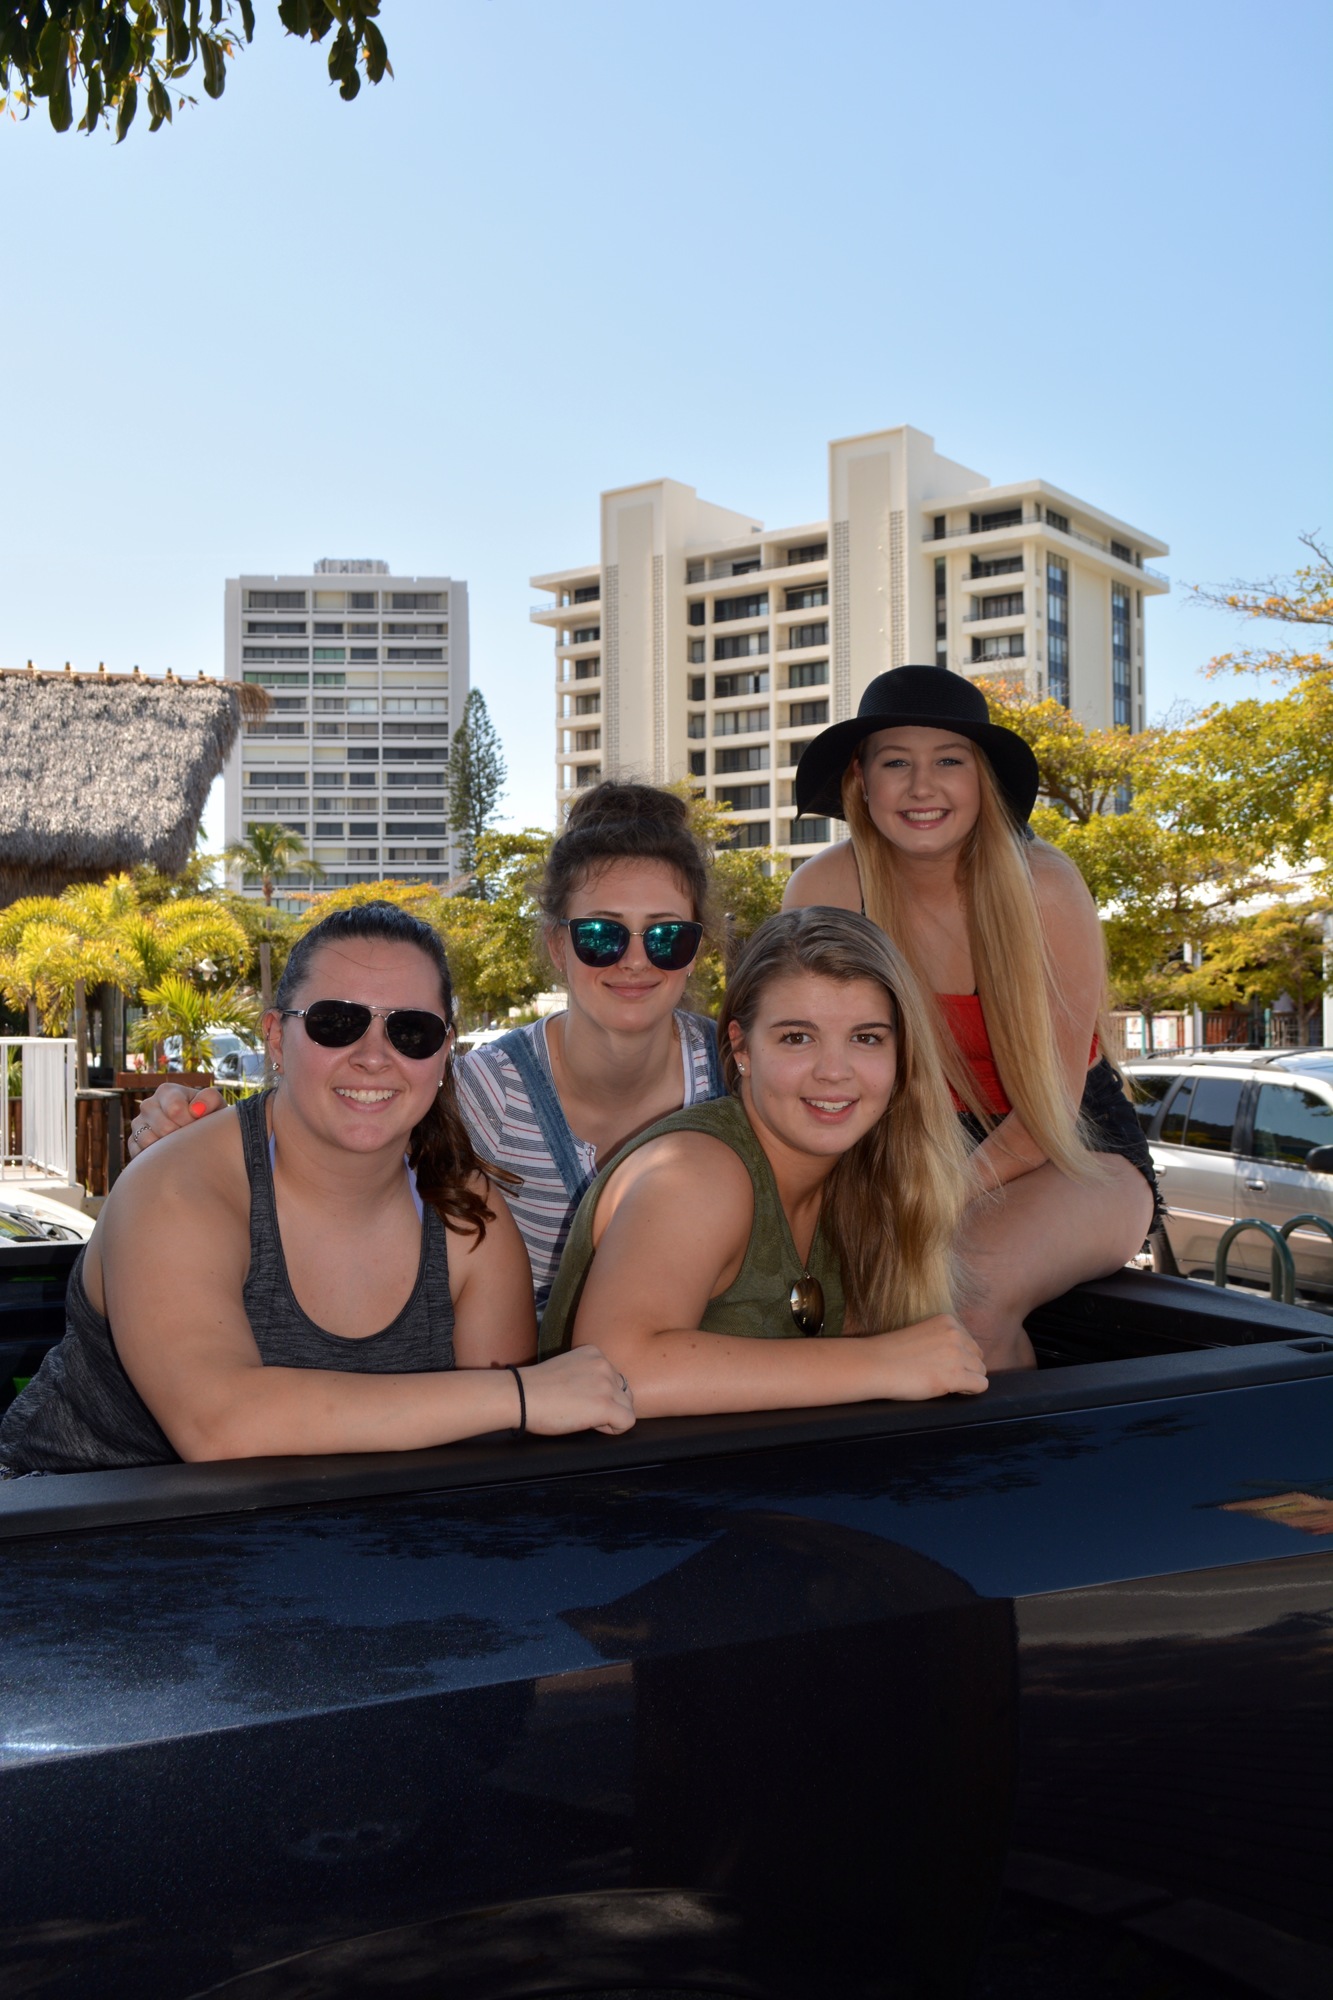 C.J. Tipping, Sydney Pierce, Lexi Palmert and Danica Polson came to Siesta Key from their college in Virginia.